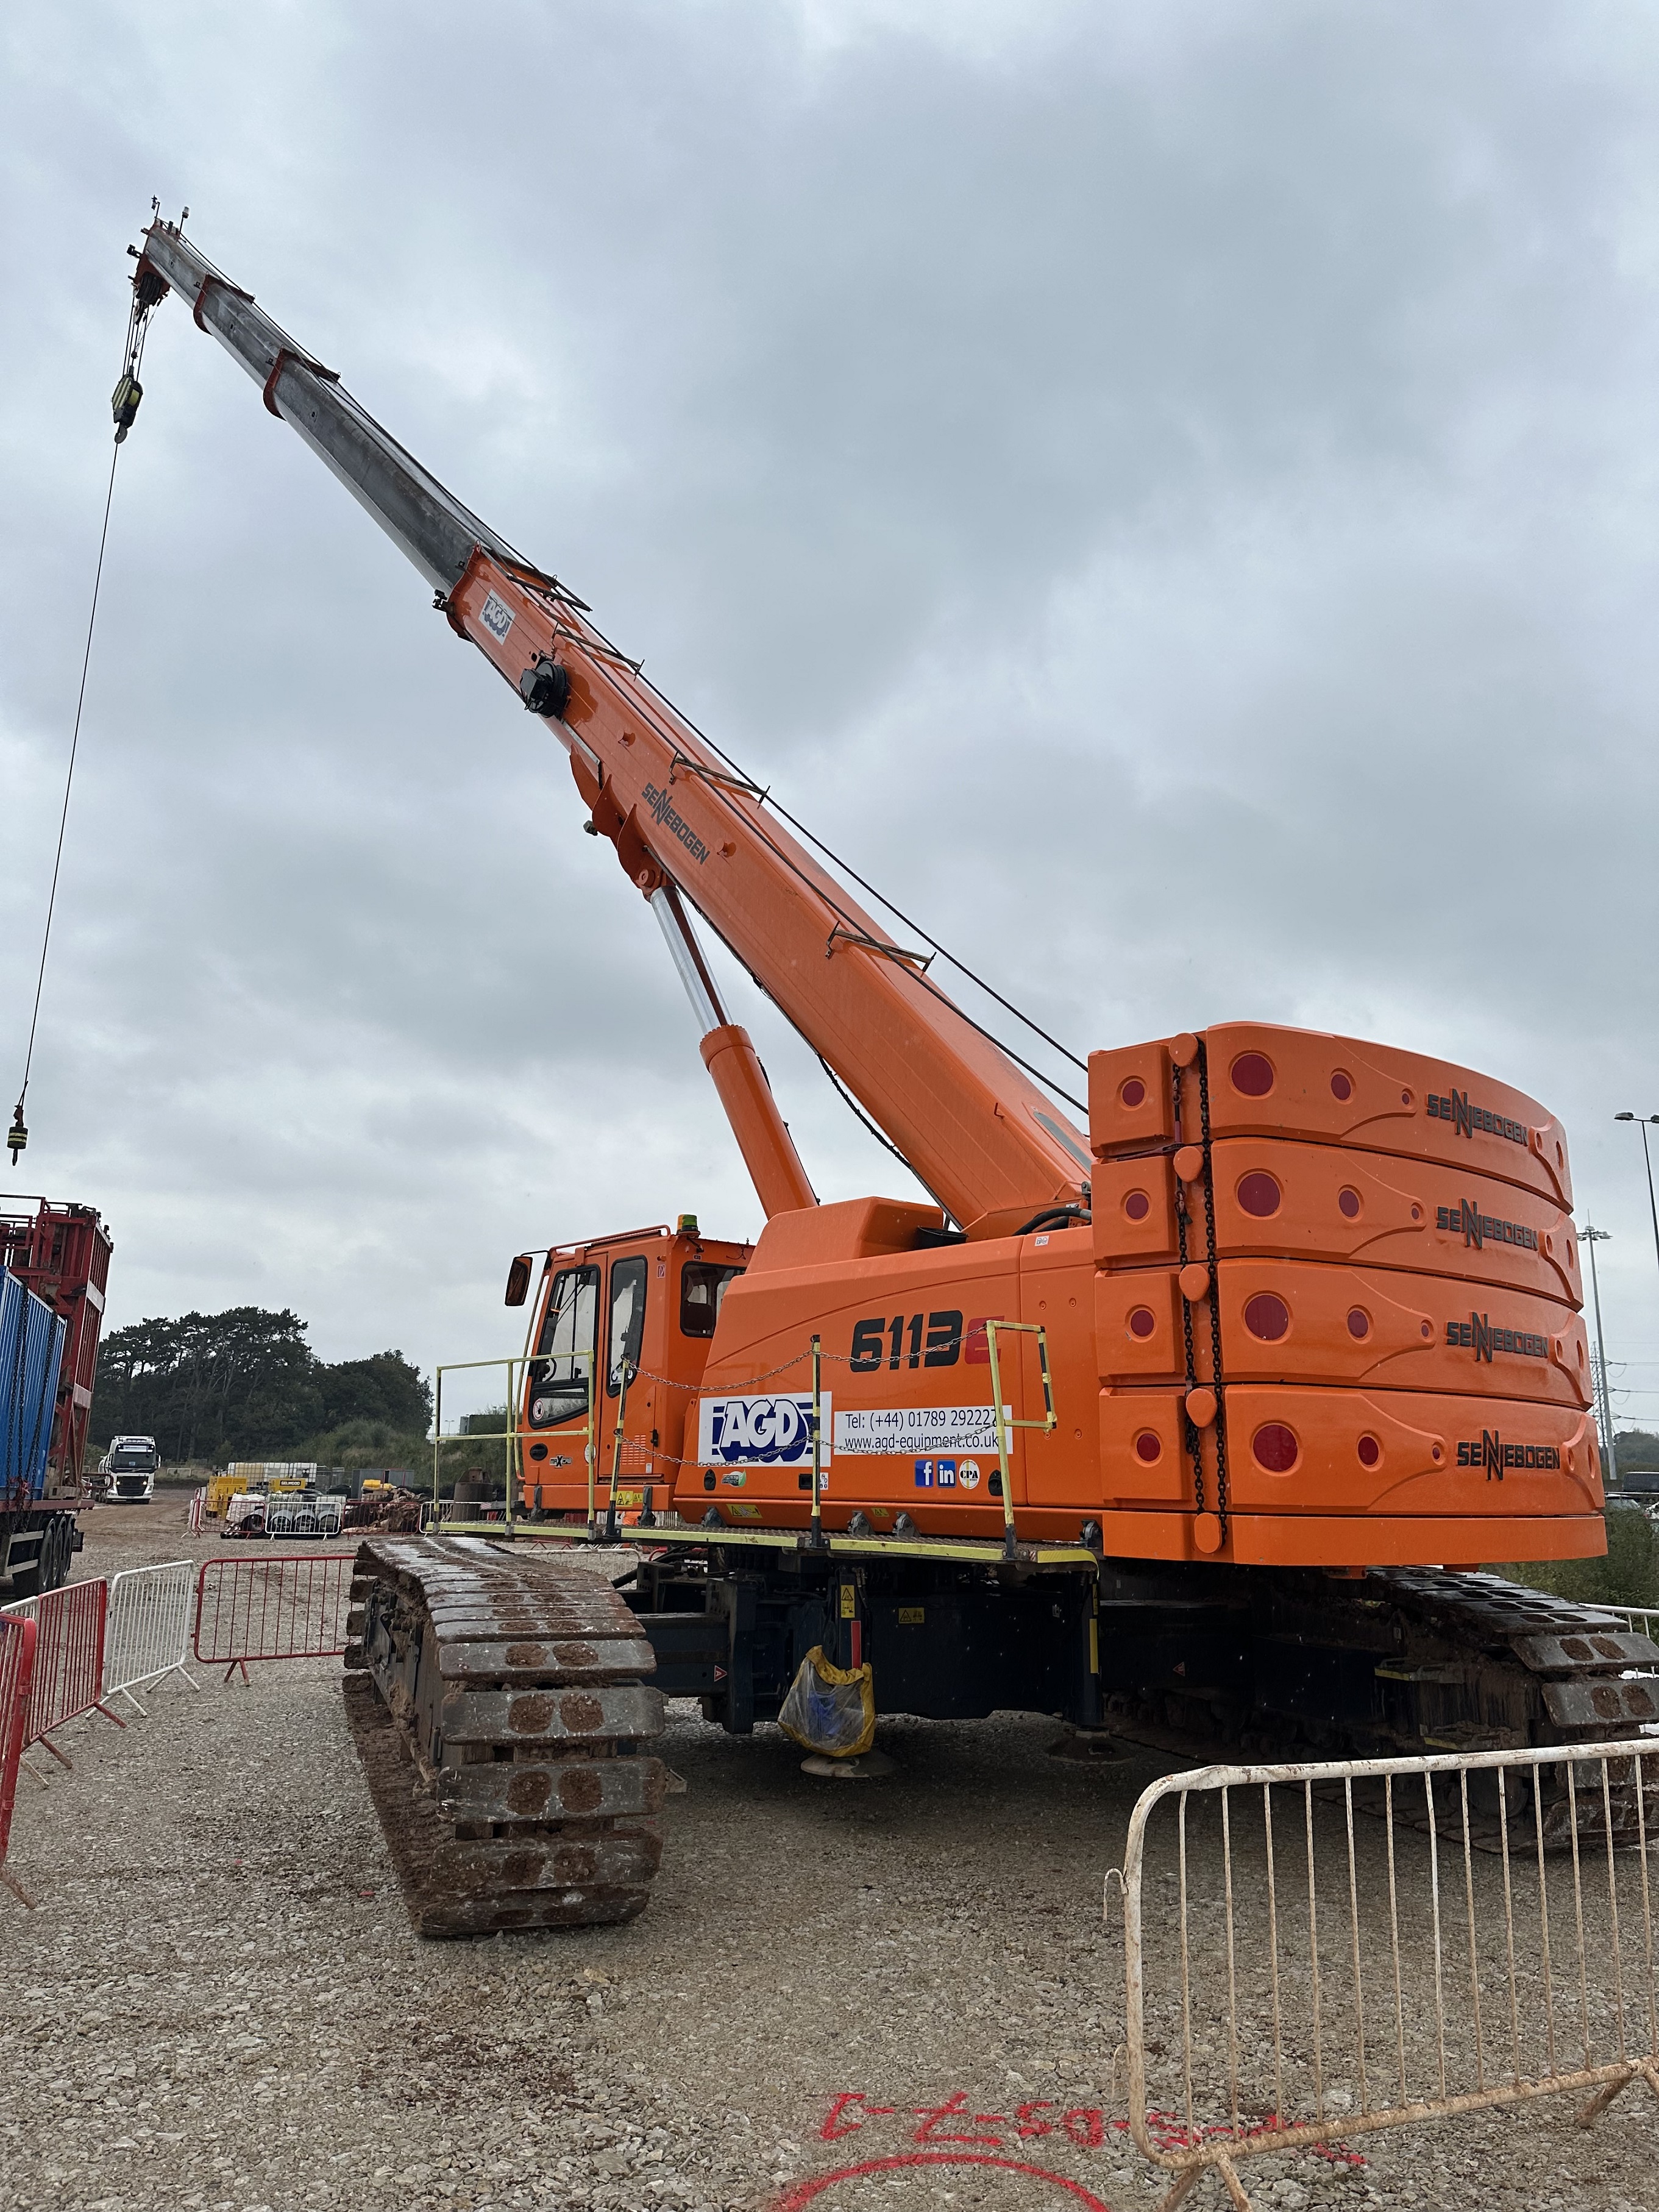 Suppliers of Reliable Telescopic Crawler Crane Rental Services